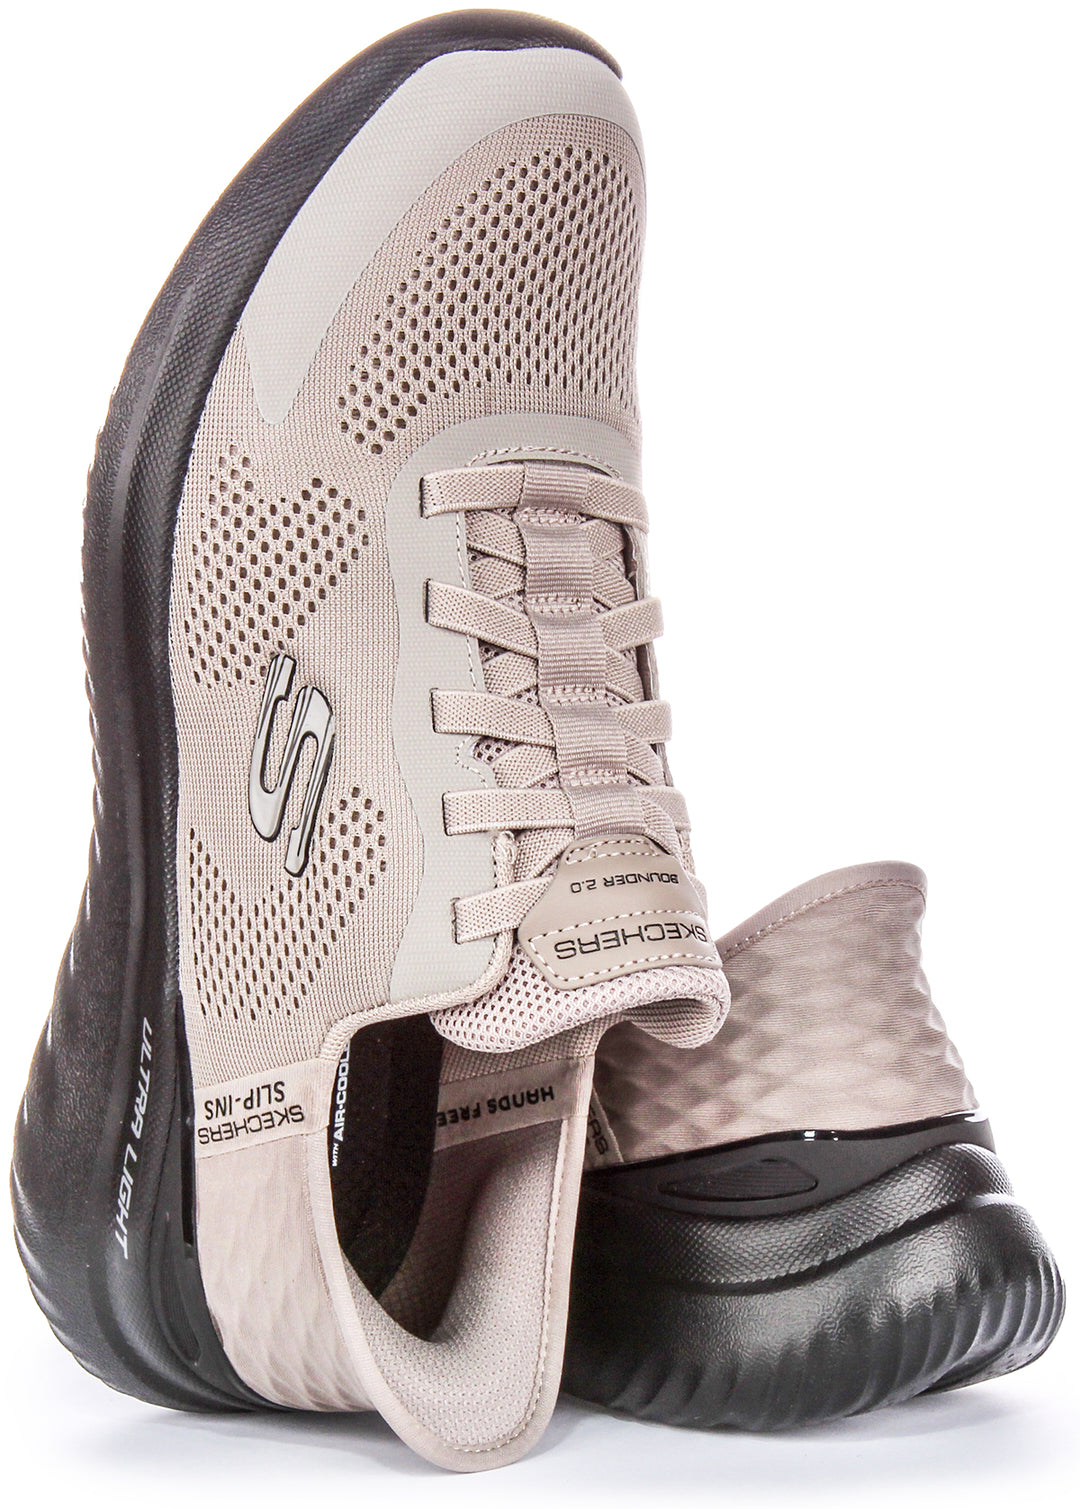 Skechers Bounder 2.0 Emerged In Taupe For Men